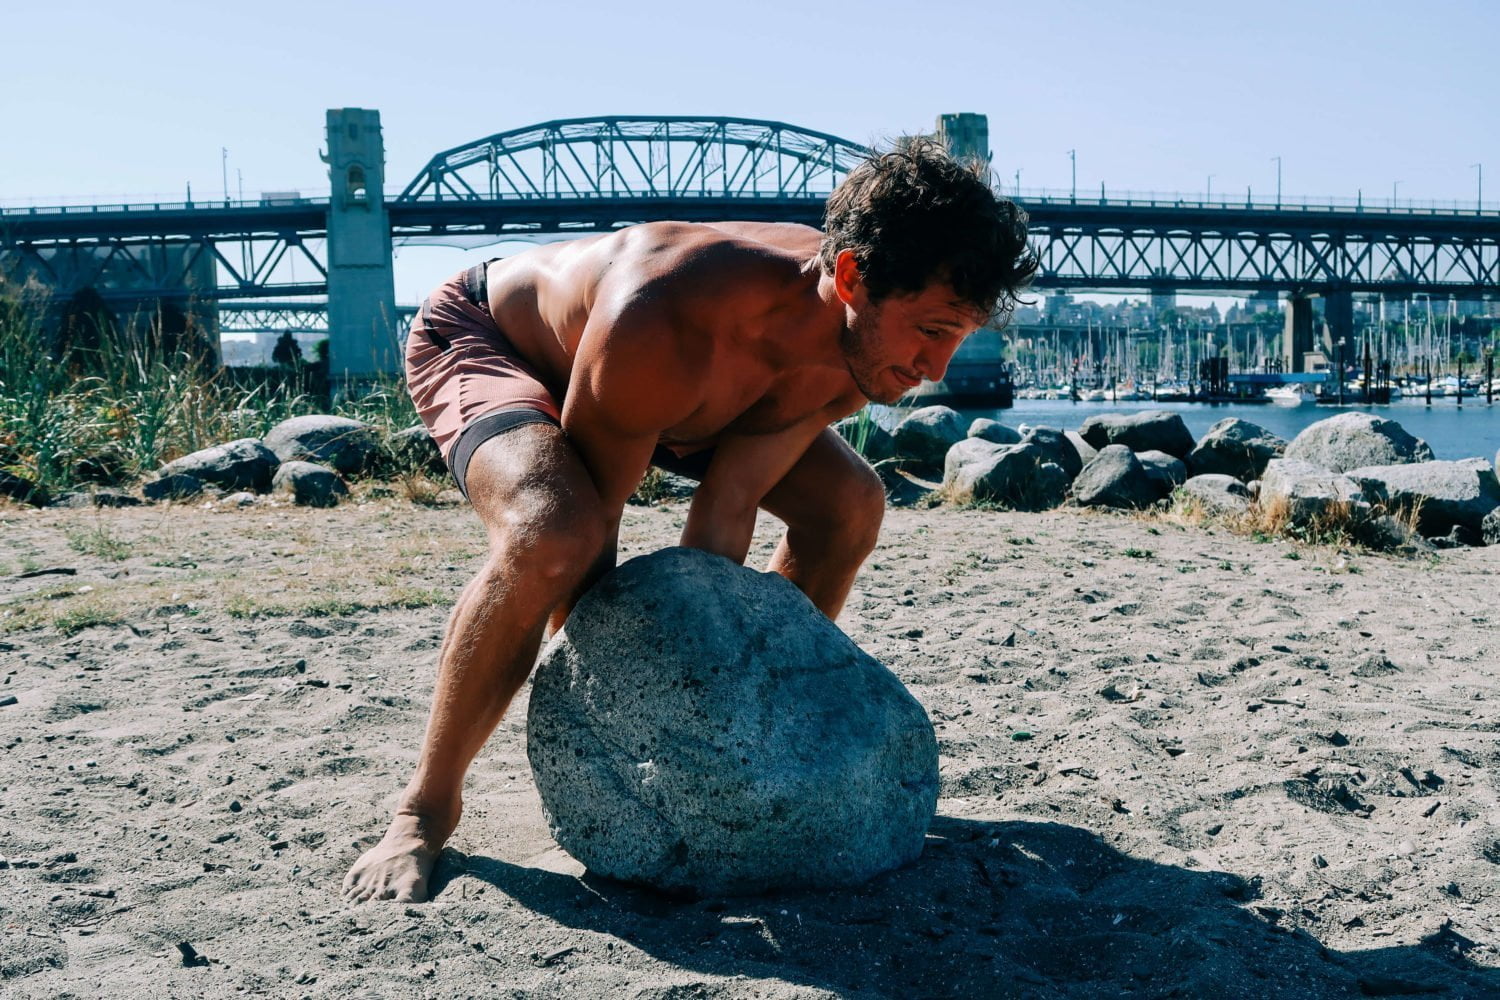 Chris rolling boulder at Sunset Beach in Vancouver.